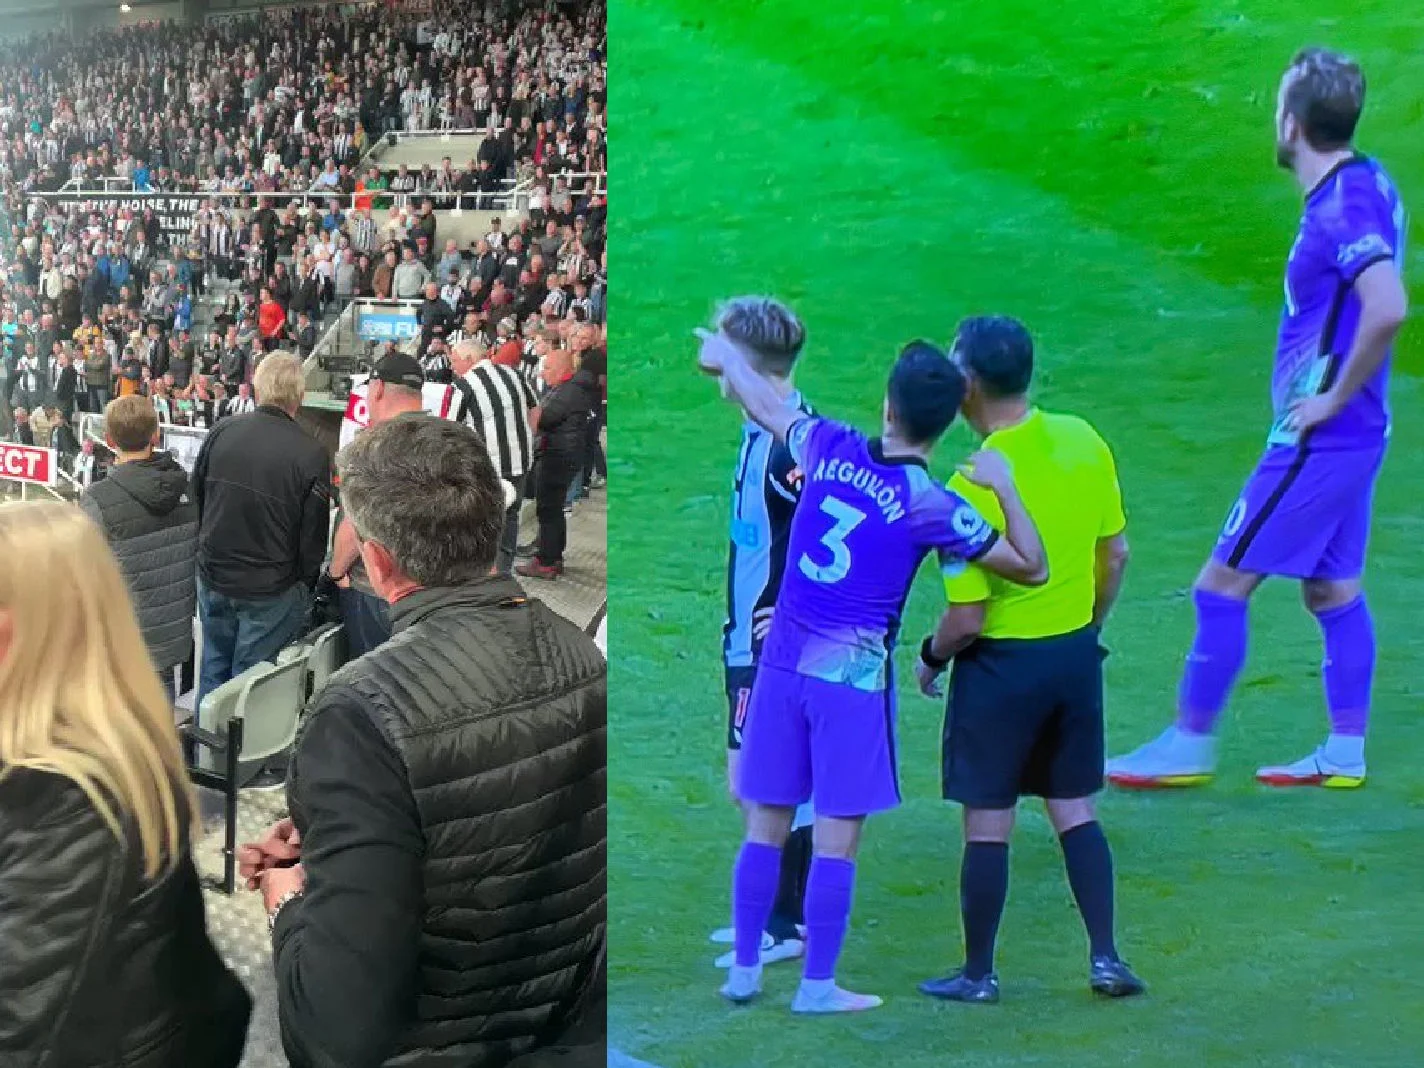 A Newcastle supporter collapsed from a suspected heart attack, and the players and supporters were quick to get medical attention to the seriously ailing fan.